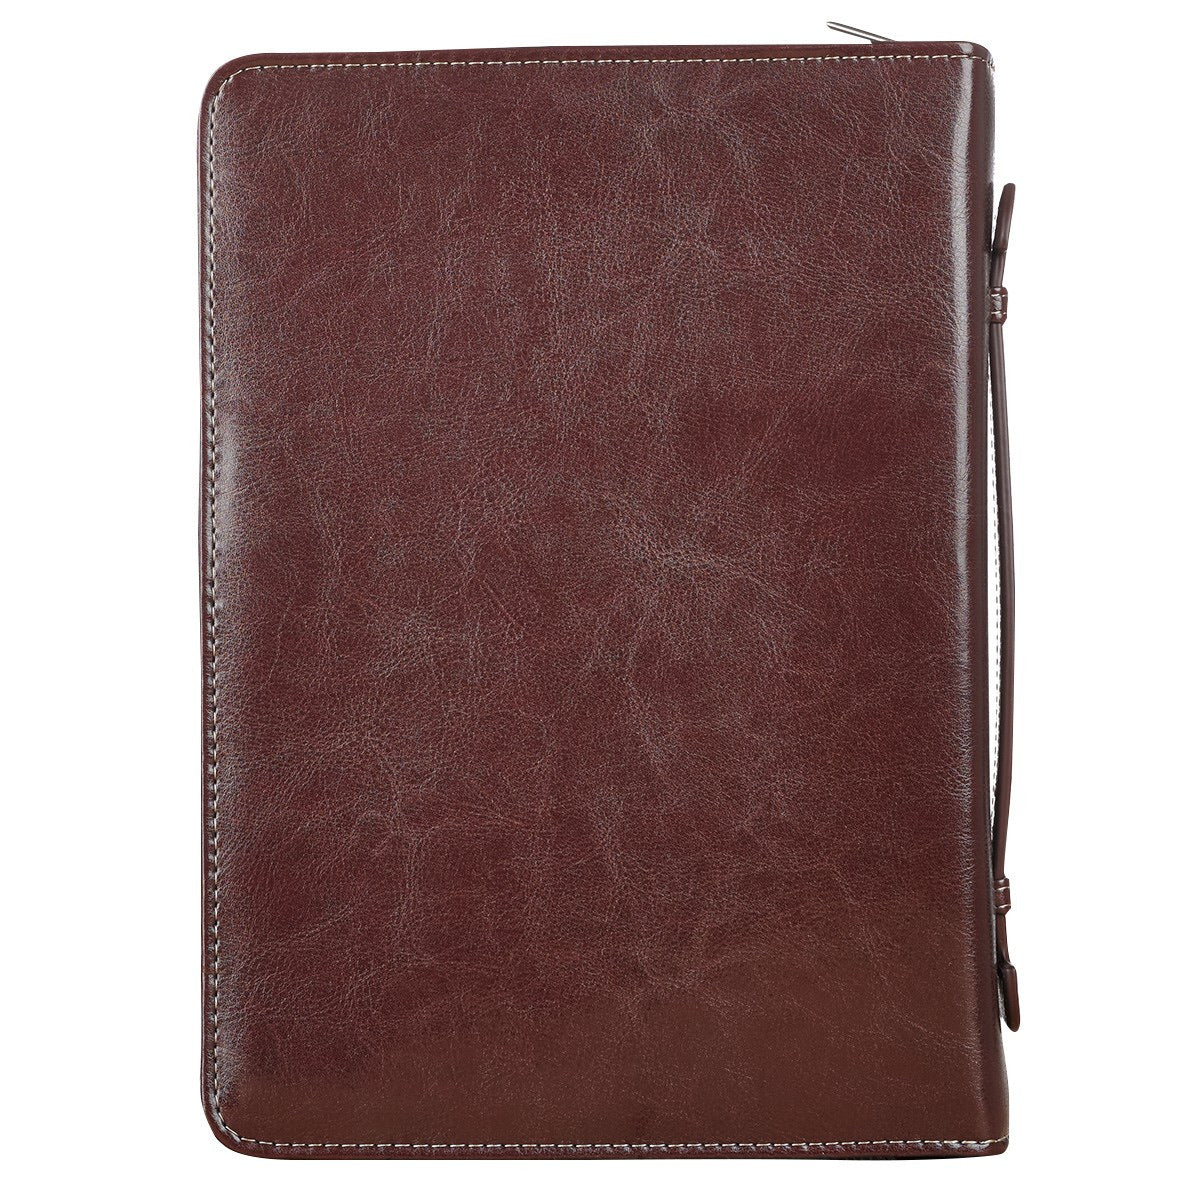 I Know the Plans Two-tone Brown Faux Leather Classic Bible Cover - Jeremiah 29:11